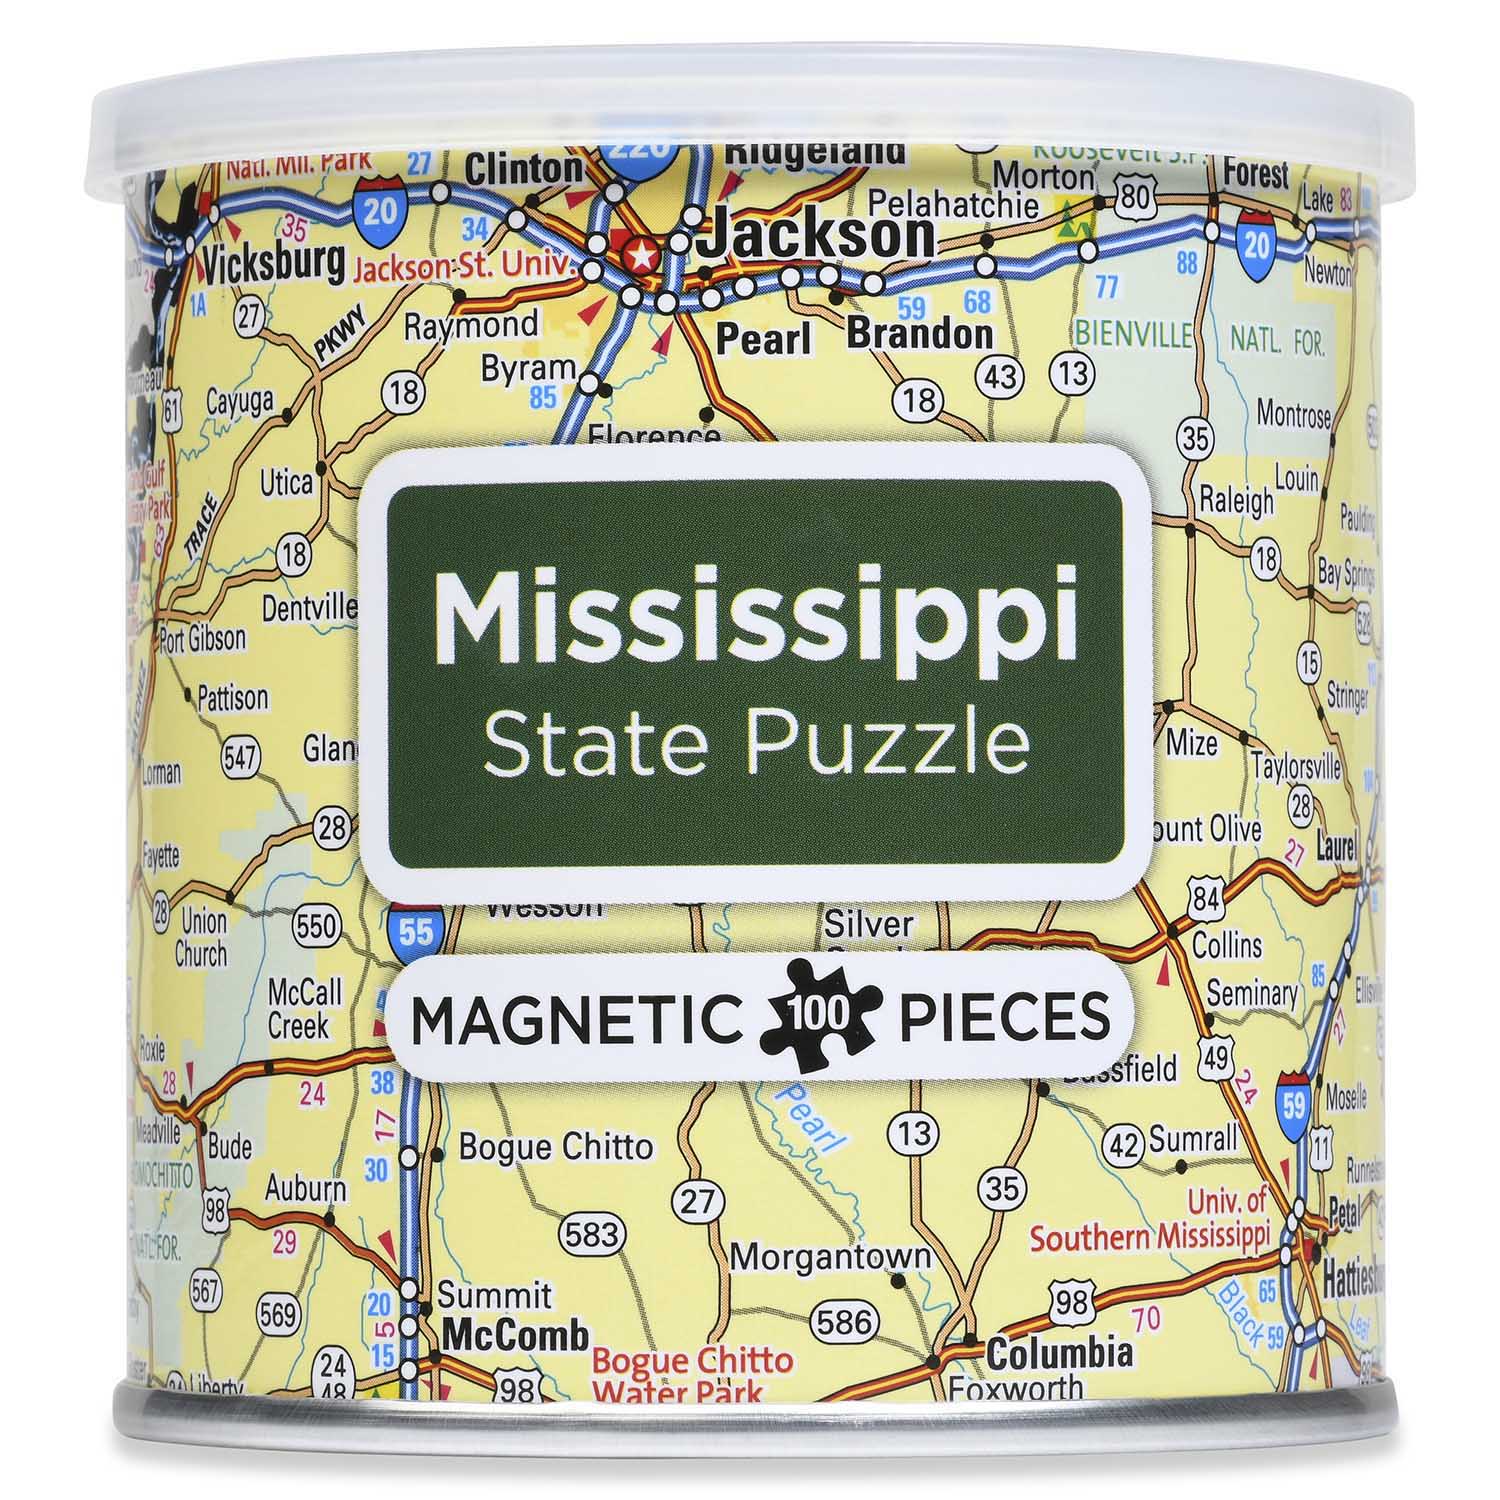 City Magnetic Puzzle Mississippi